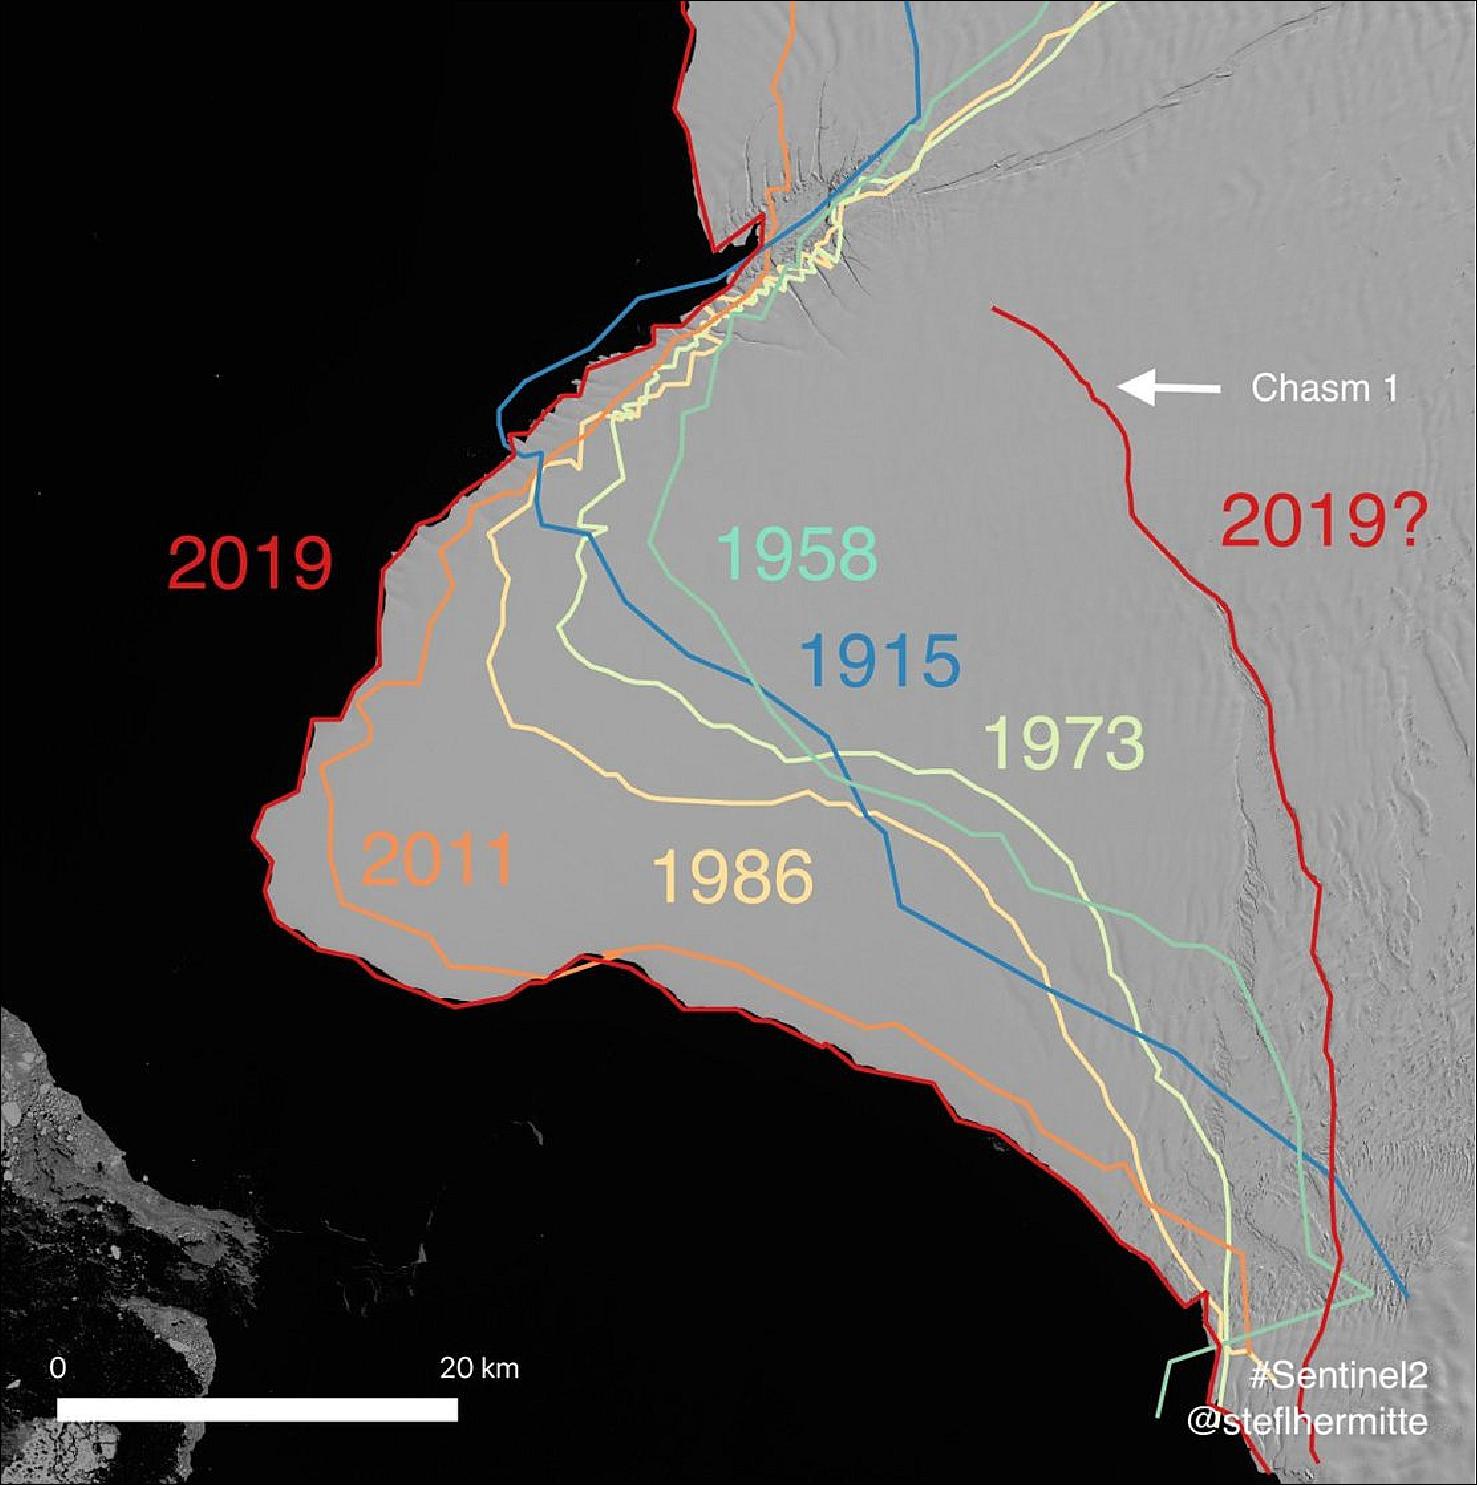 Figure 30: Changing locations of Brunt calving. A comparison of the Brunt ice shelf calving front locations over the last 100 years, based on 1915 and 1958 historical survey data from the Endurance expedition (Worsley 1921) and the International Geophysical Year, respectively, followed by the location in satellite images from Landsat in 1973 and 1978, ESA’s, Envisat in 2011, and Copernicus Sentinel-1 in 2019. A comparison of the images indicates that the Brunt ice shelf is at its maximum 20th Century extent (image credit: ESA, the image contains modified Copernicus Sentinel-2 data (2019), courtesy Stef l'Hermitte TU Delft)